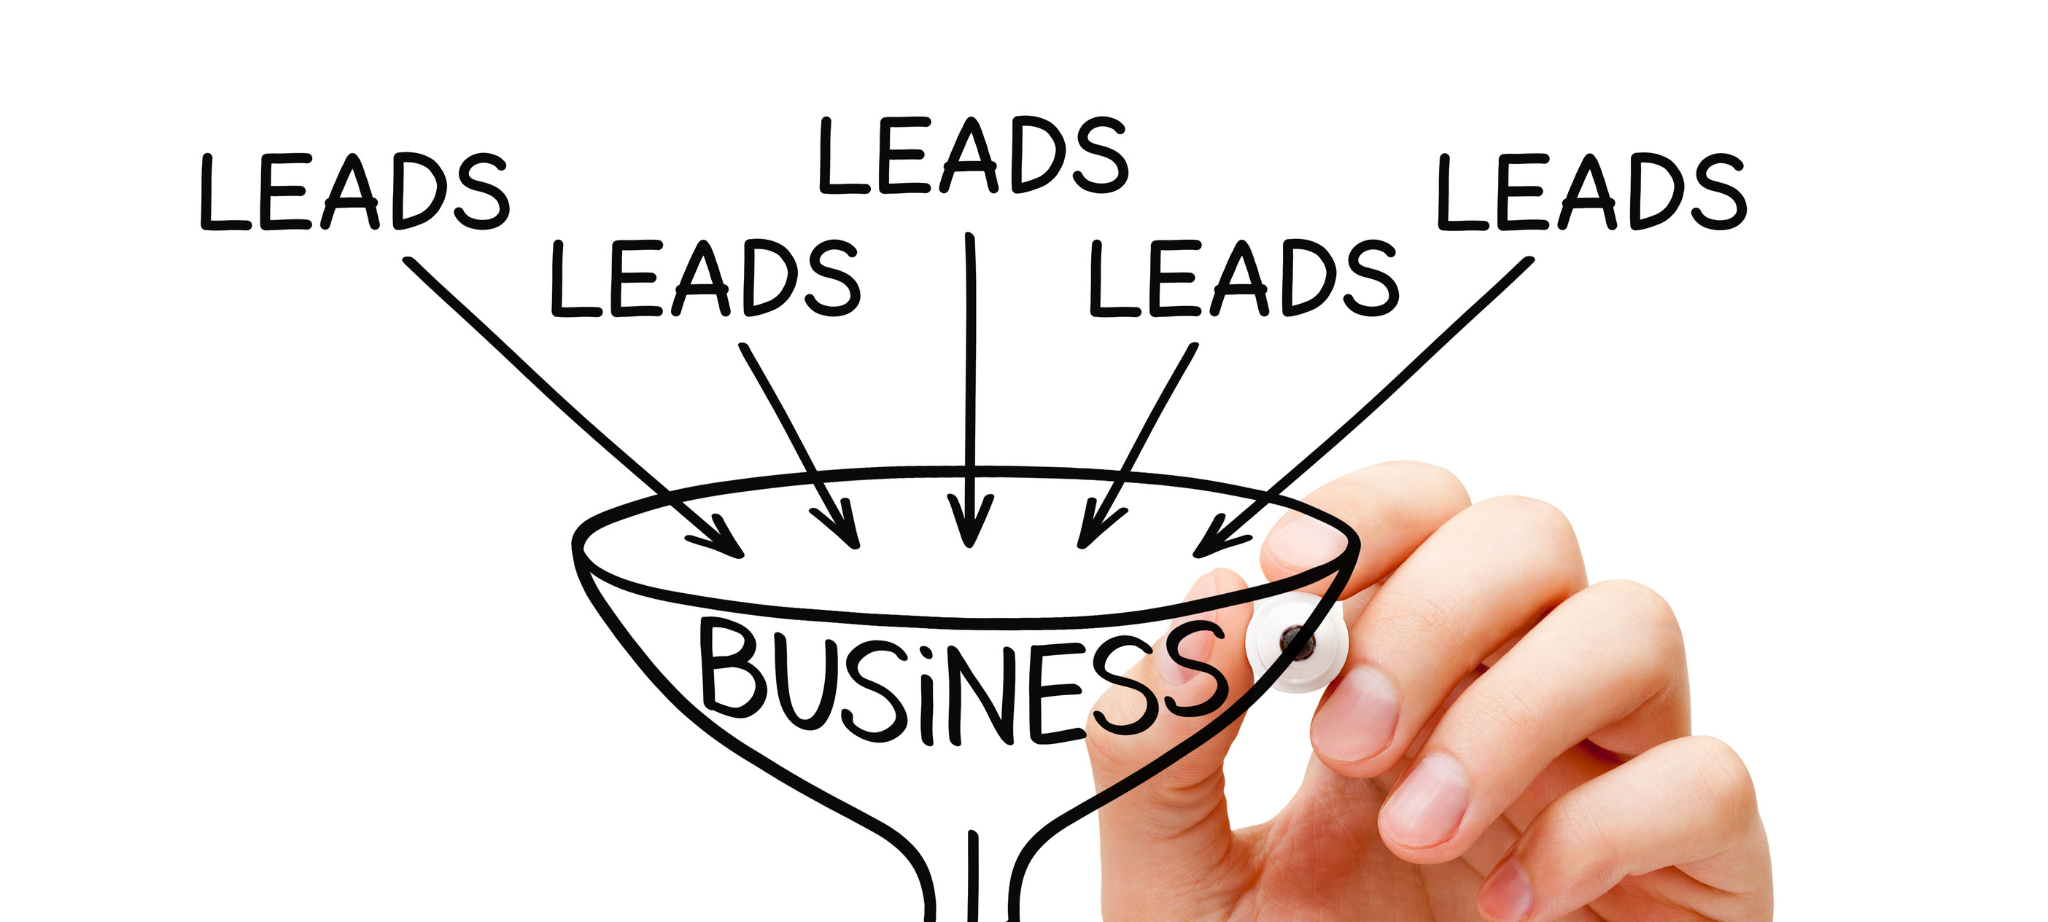 How to Increase B2B Virtual Lead Generation at Virtual Events in 2022